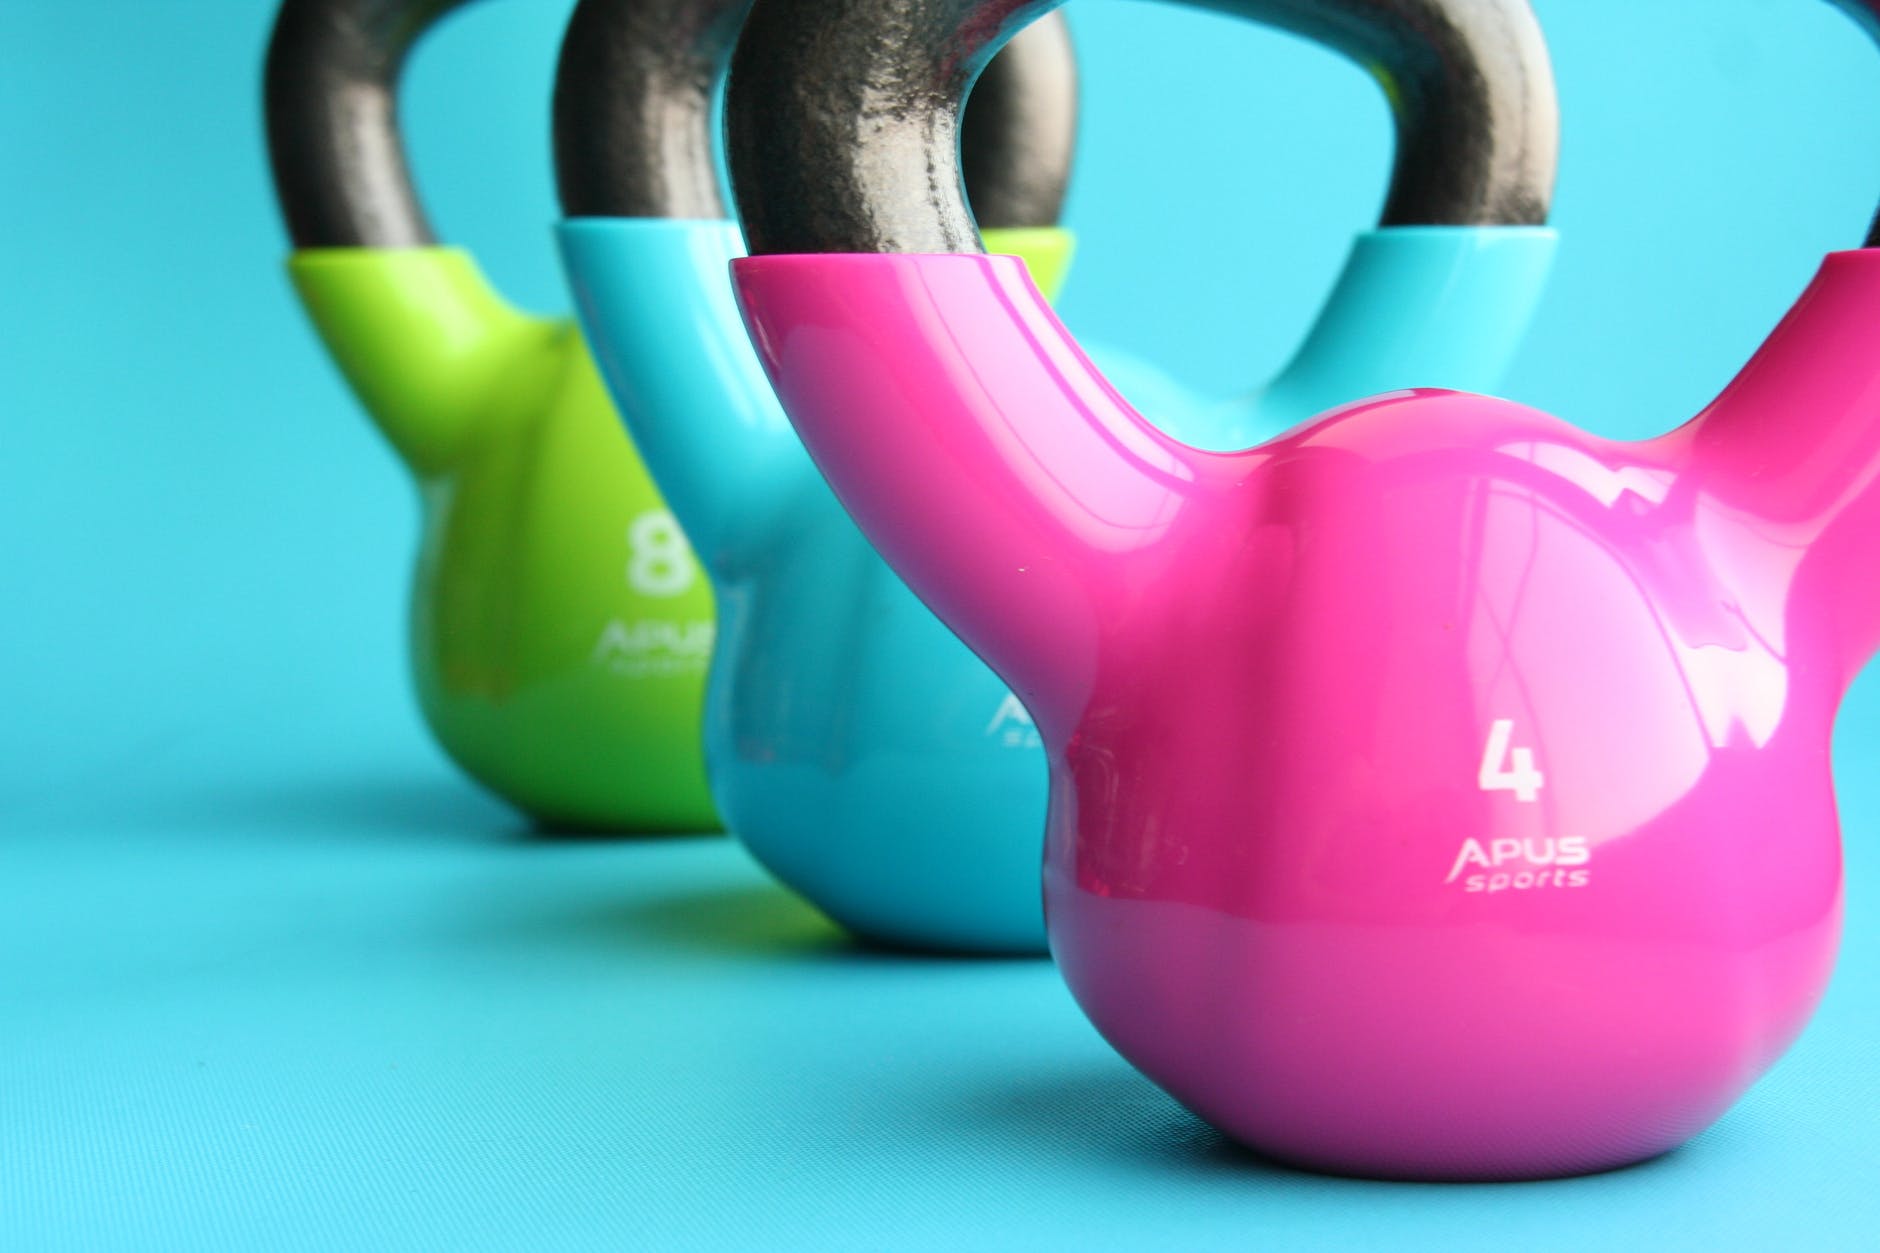 kettlebells do not need much space